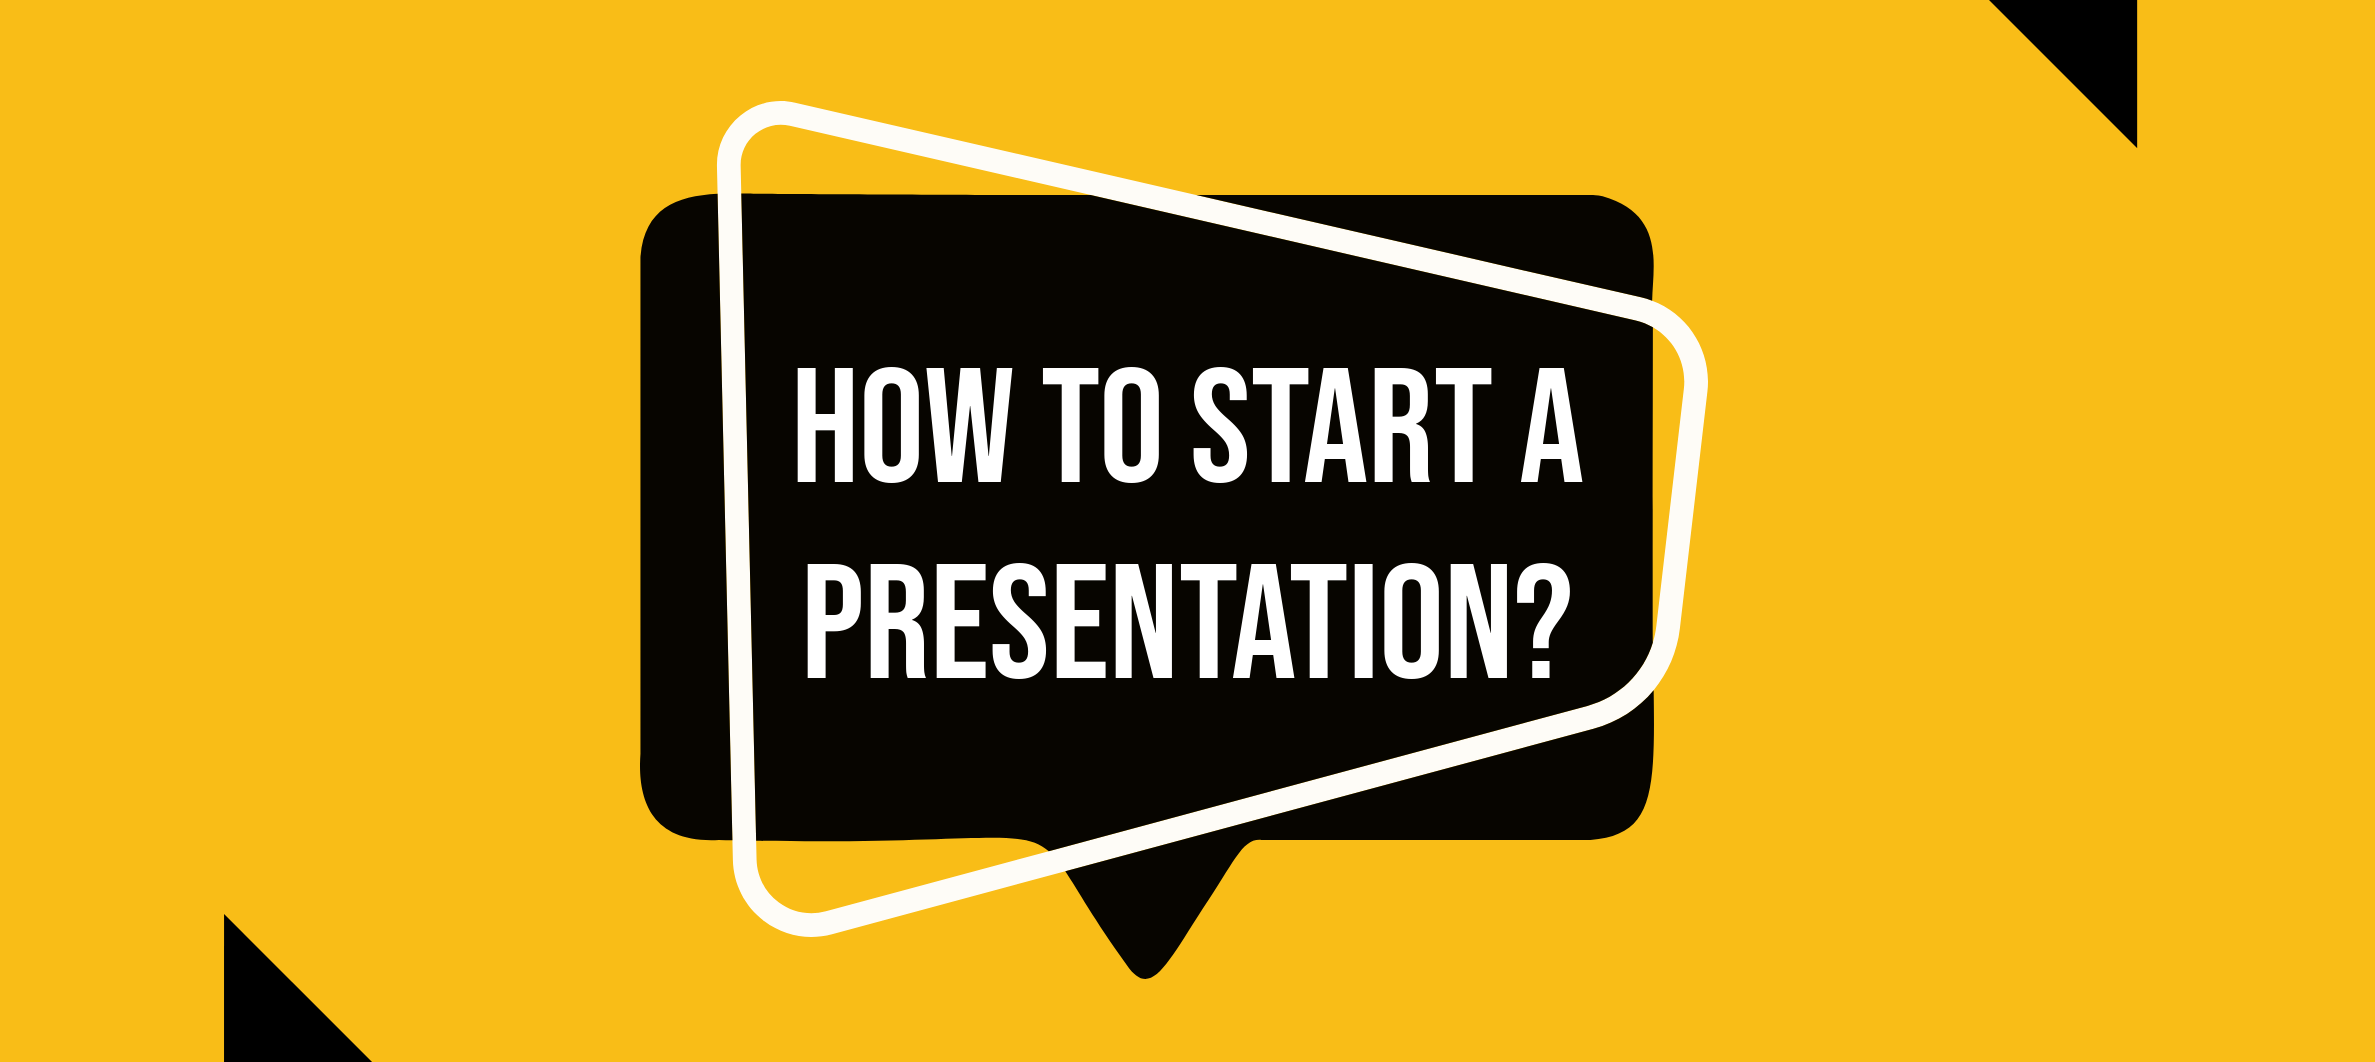 how to start presentation with quote